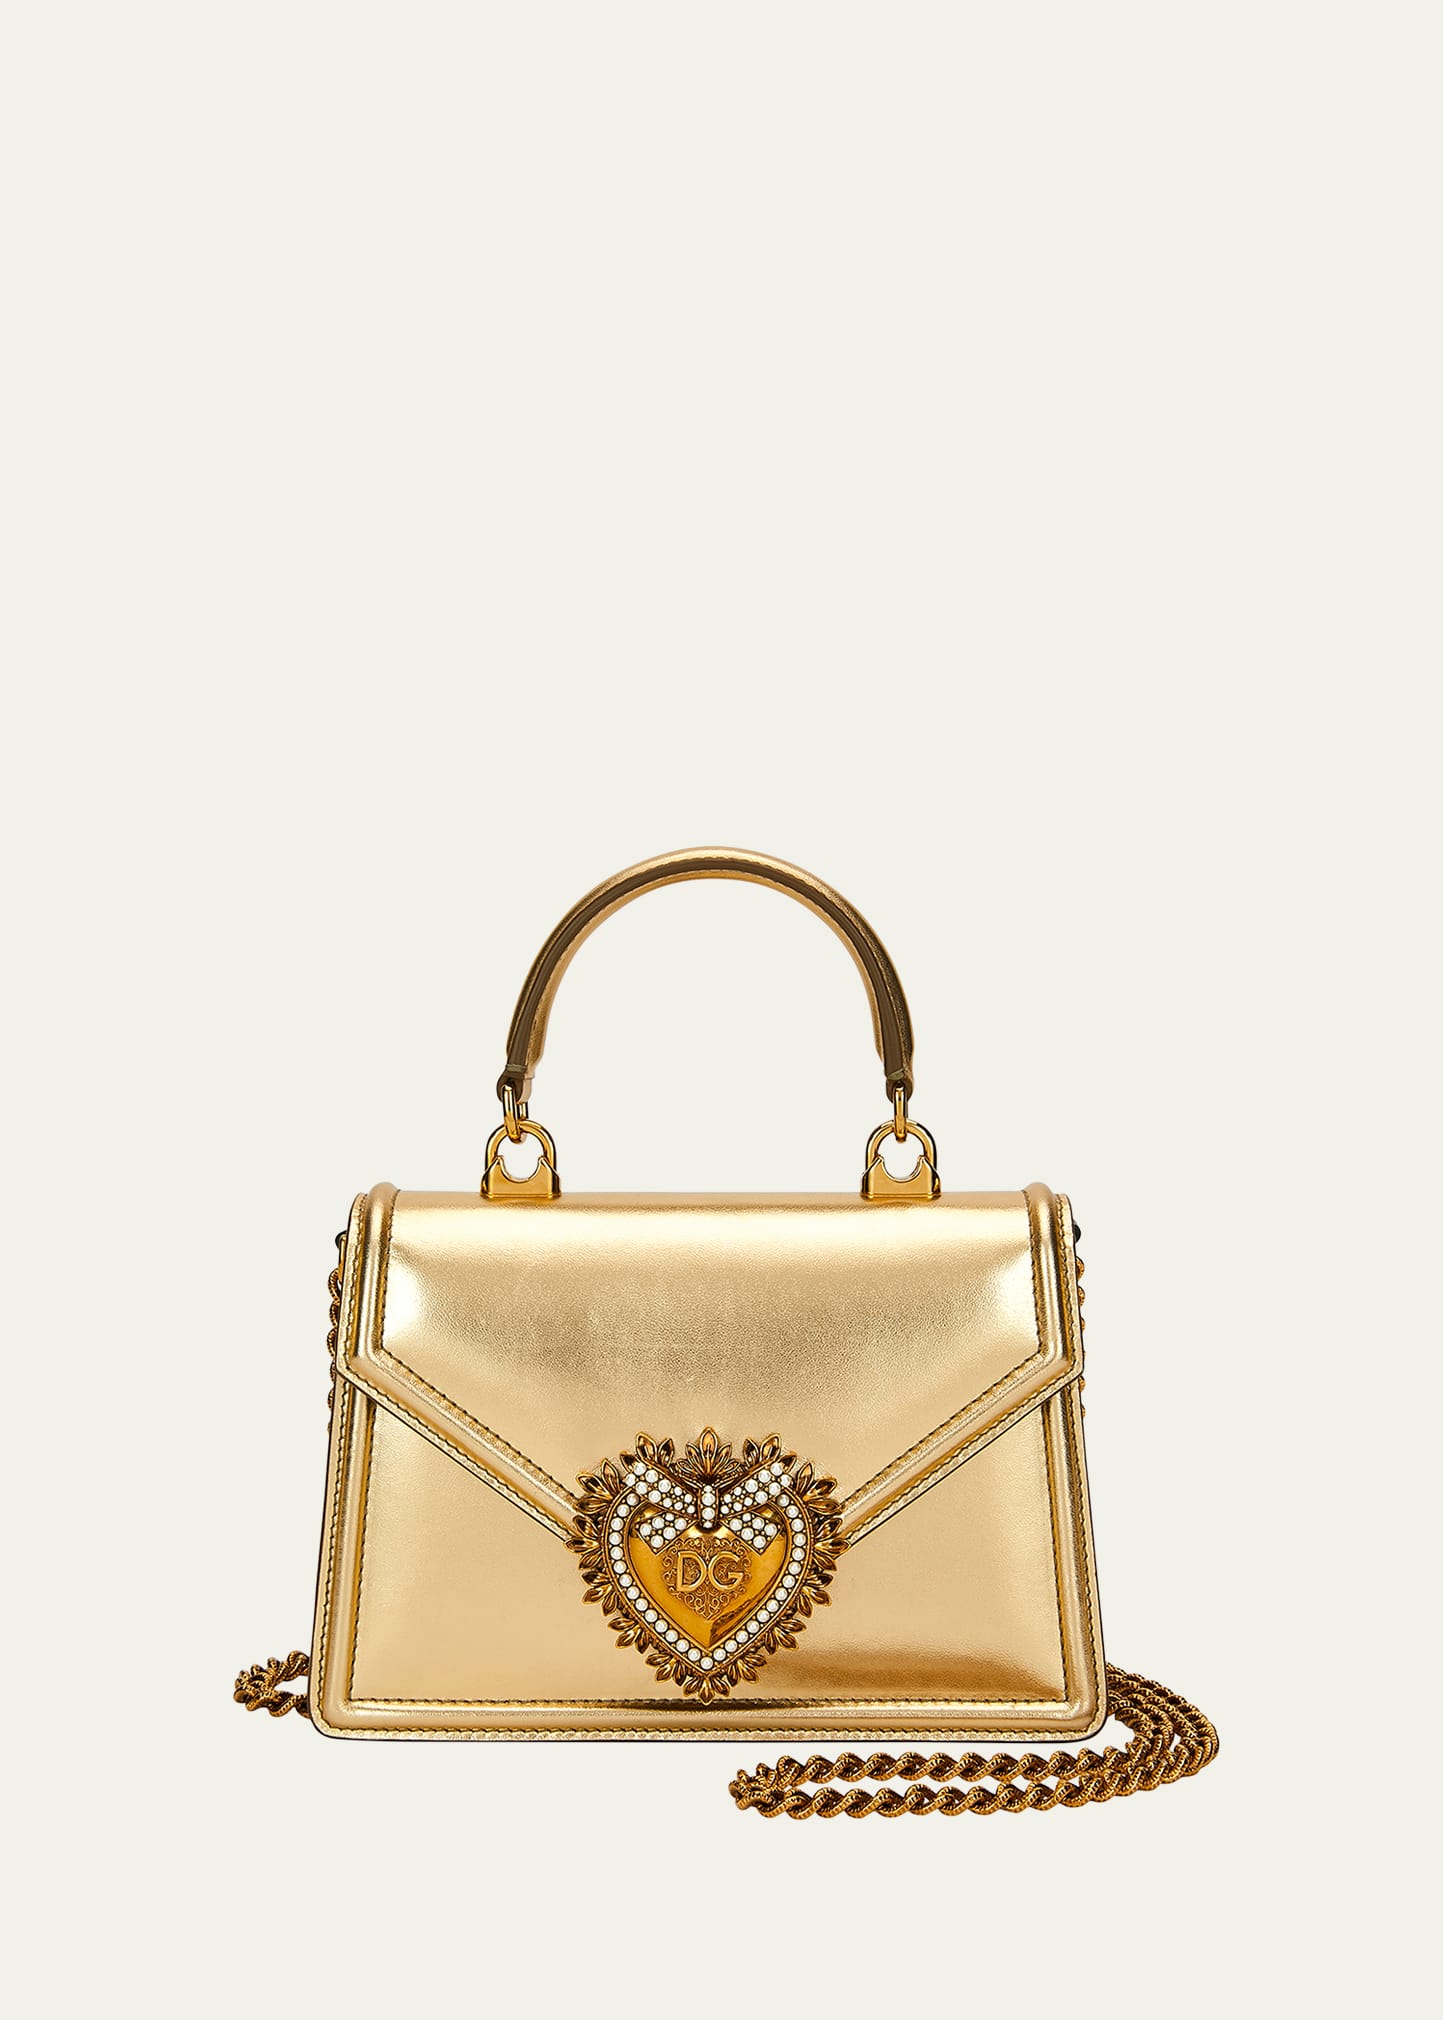 dolce and gabbana bags price